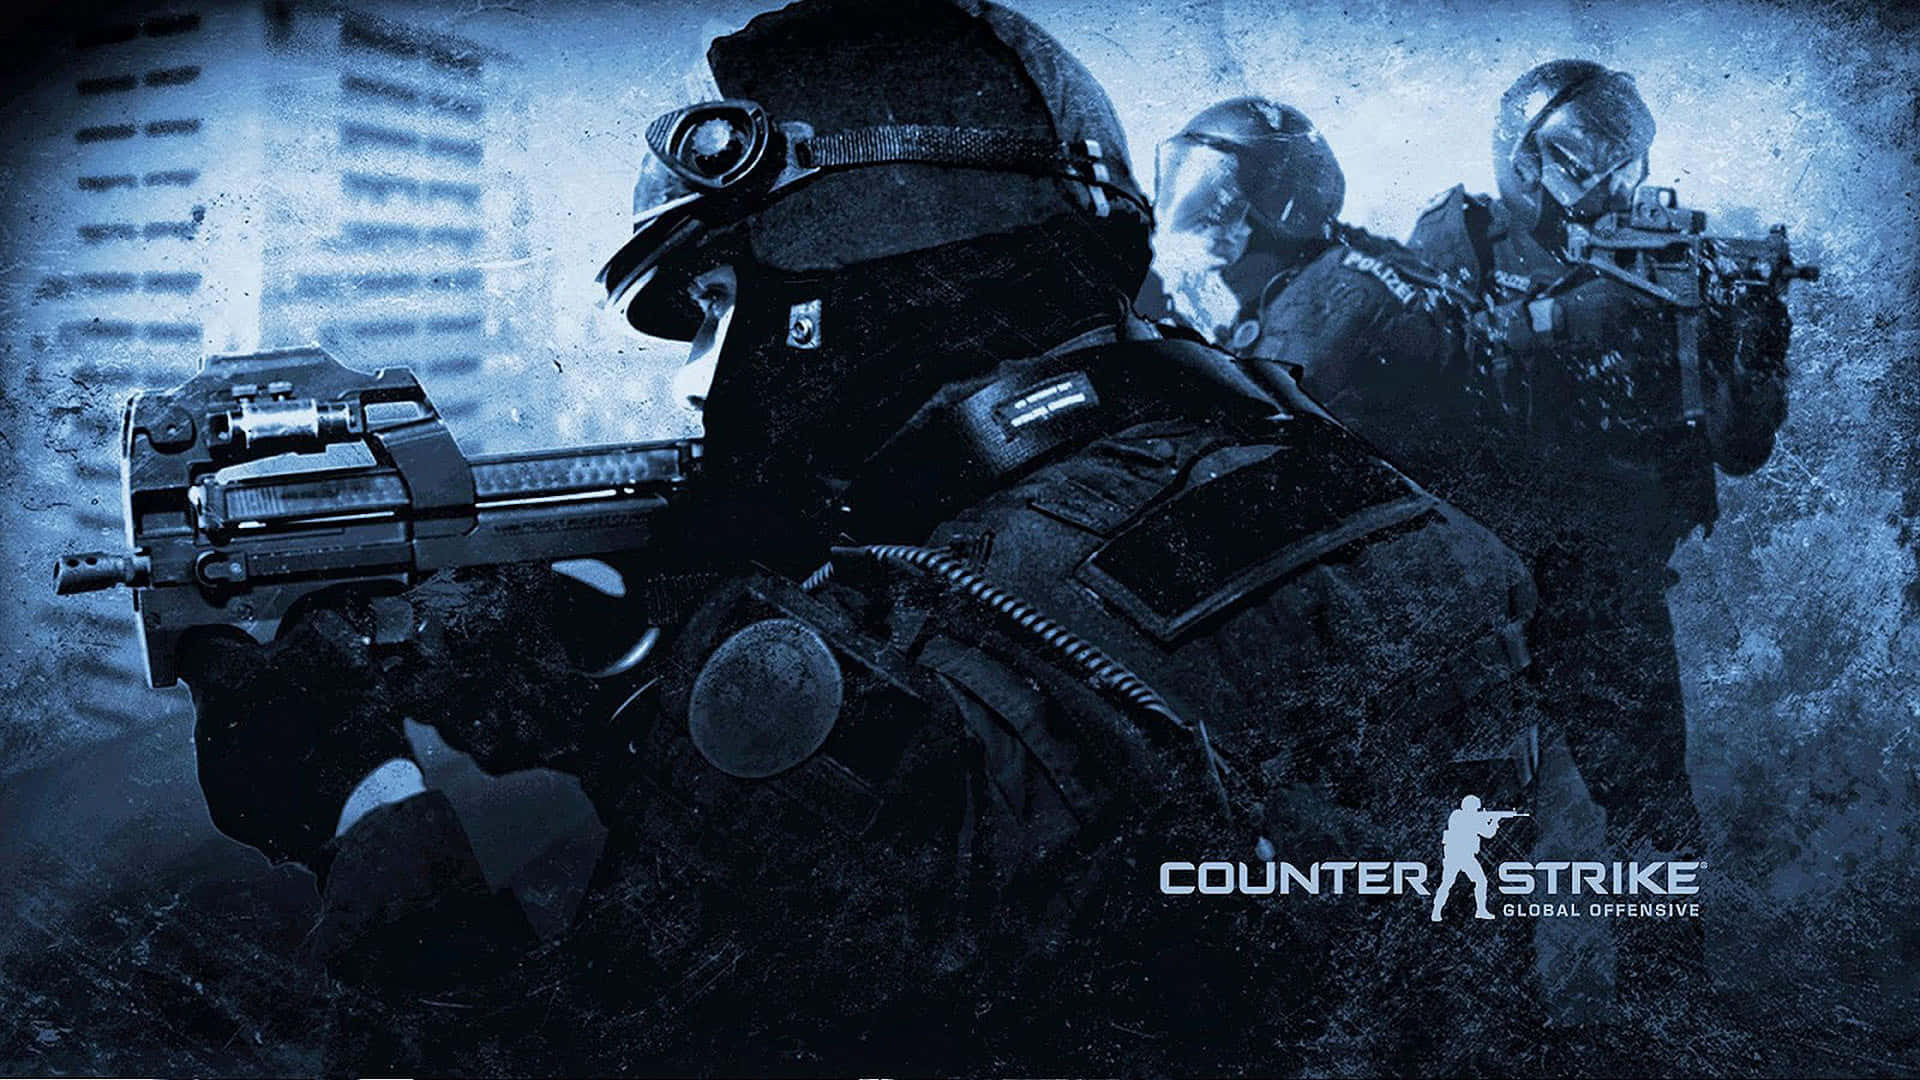 Professionelle Esports-spillere Dyster Ved Counterstrike-turnering Wallpaper